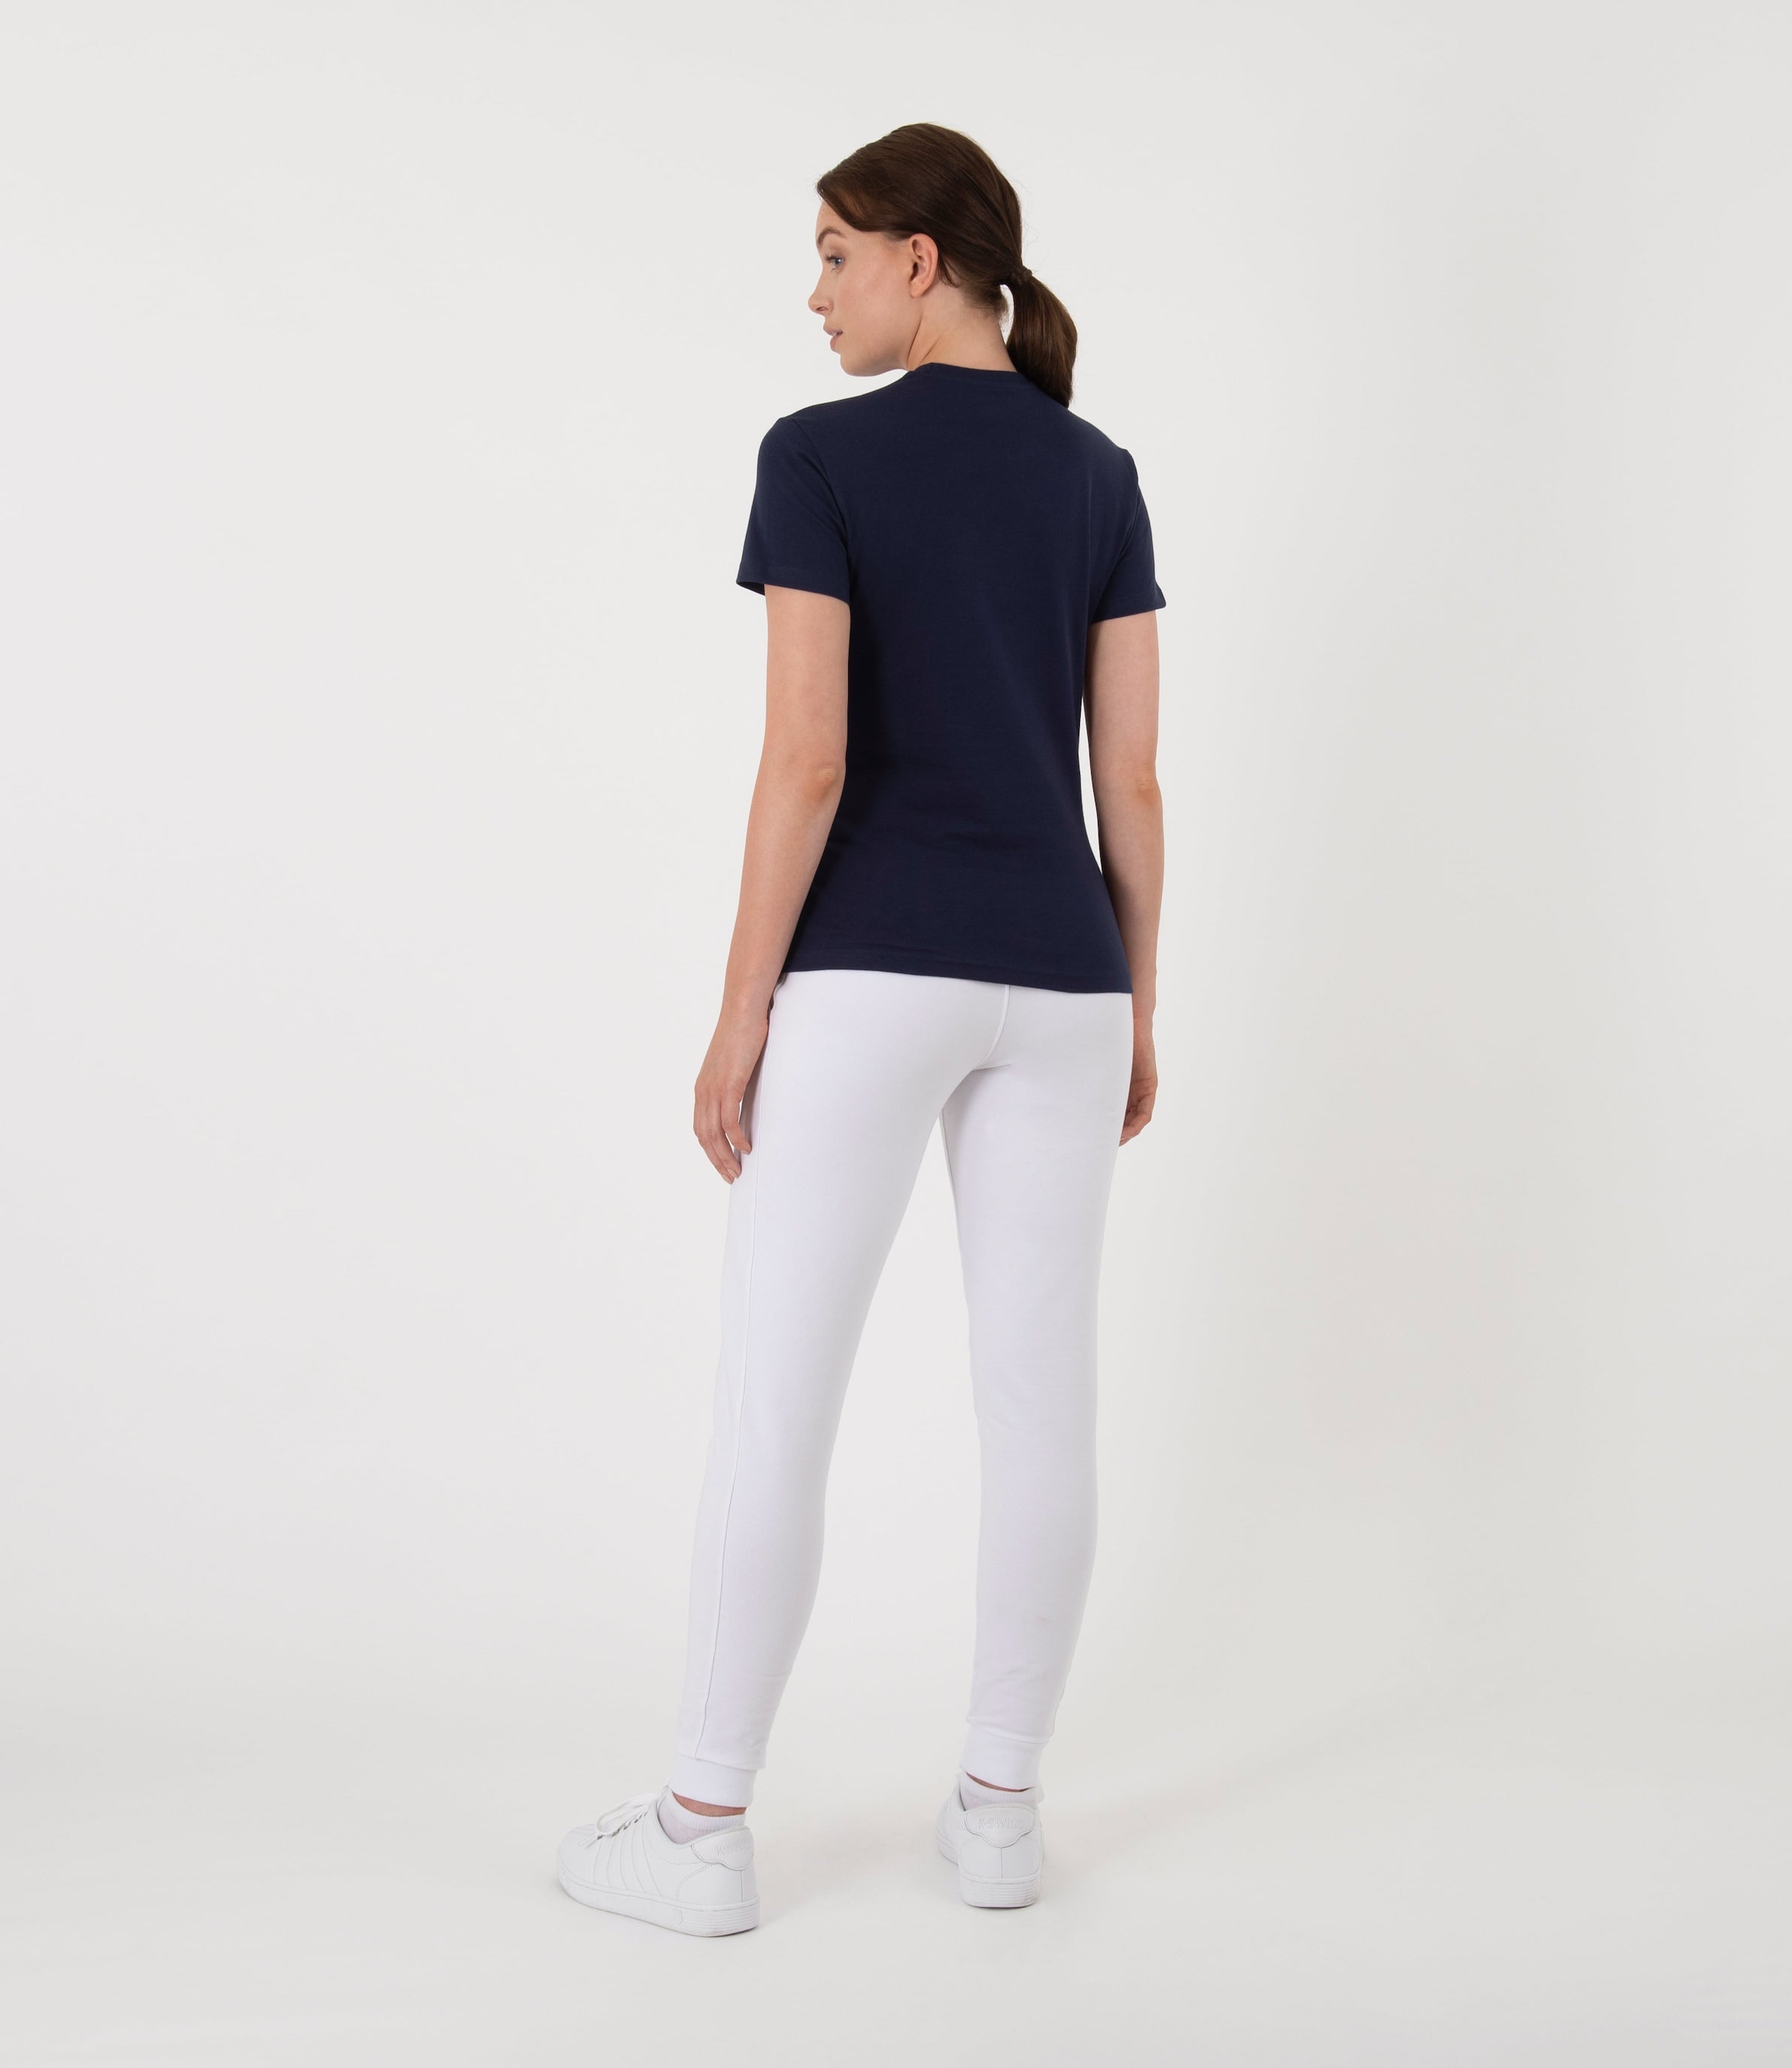 Sophie Cotton Tee - Navy/Red/White